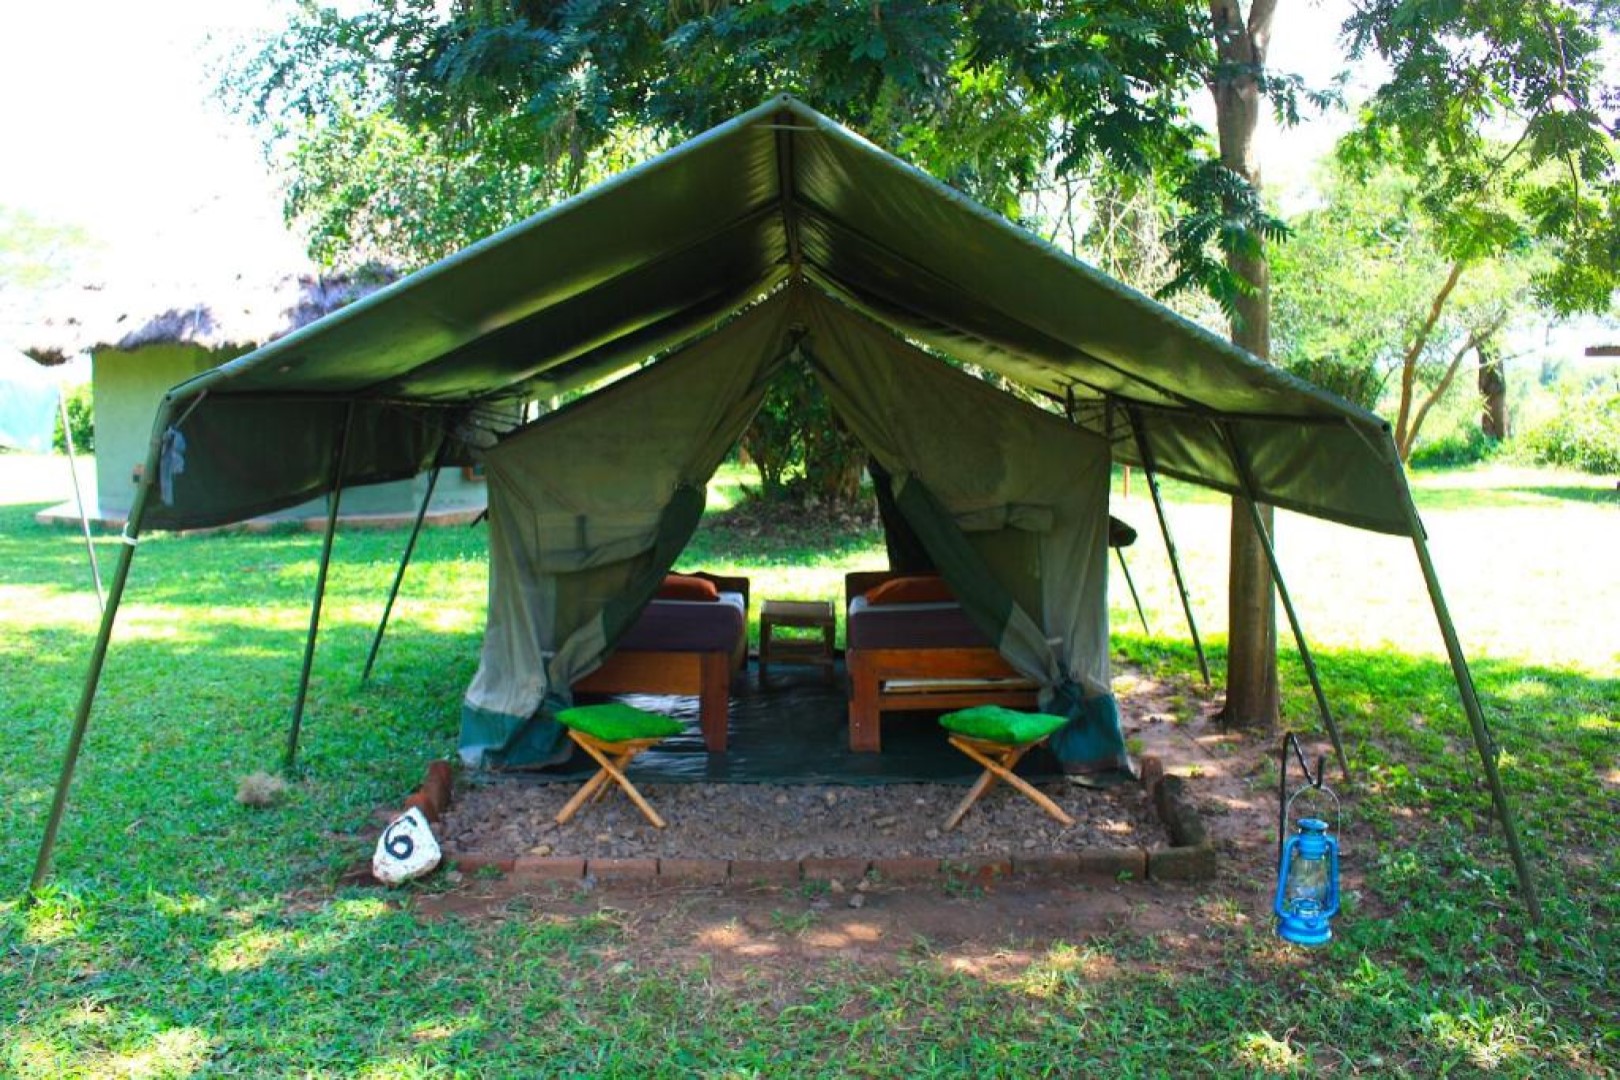 One of the camping tents at Red Chili Rest Camp, Murchison Falls National Park